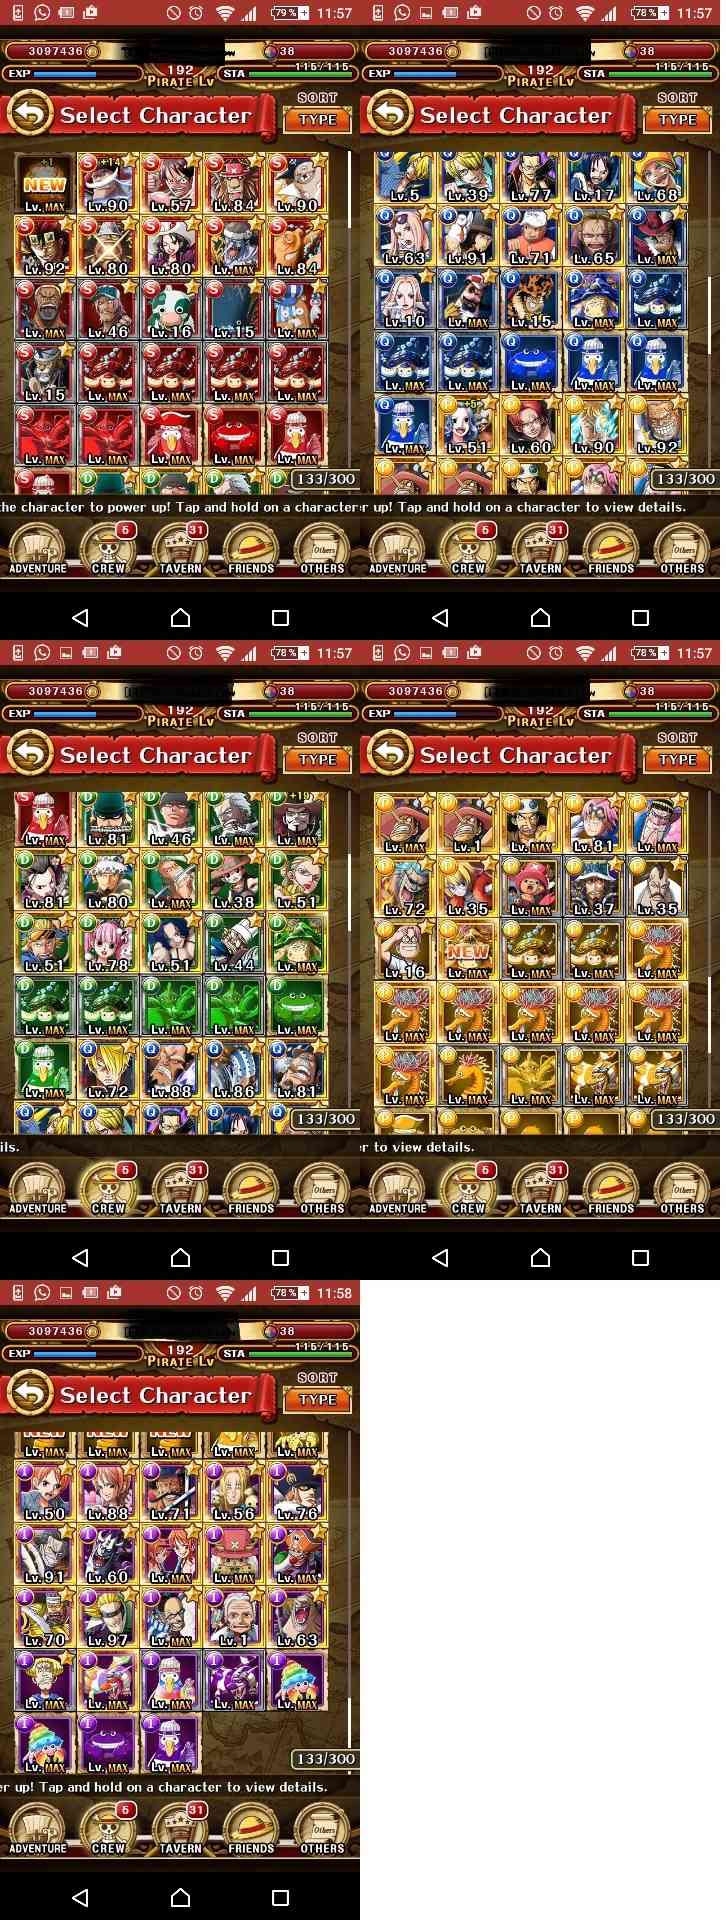 Selling WB Global Acc. P-Lvl 192 Charbo11